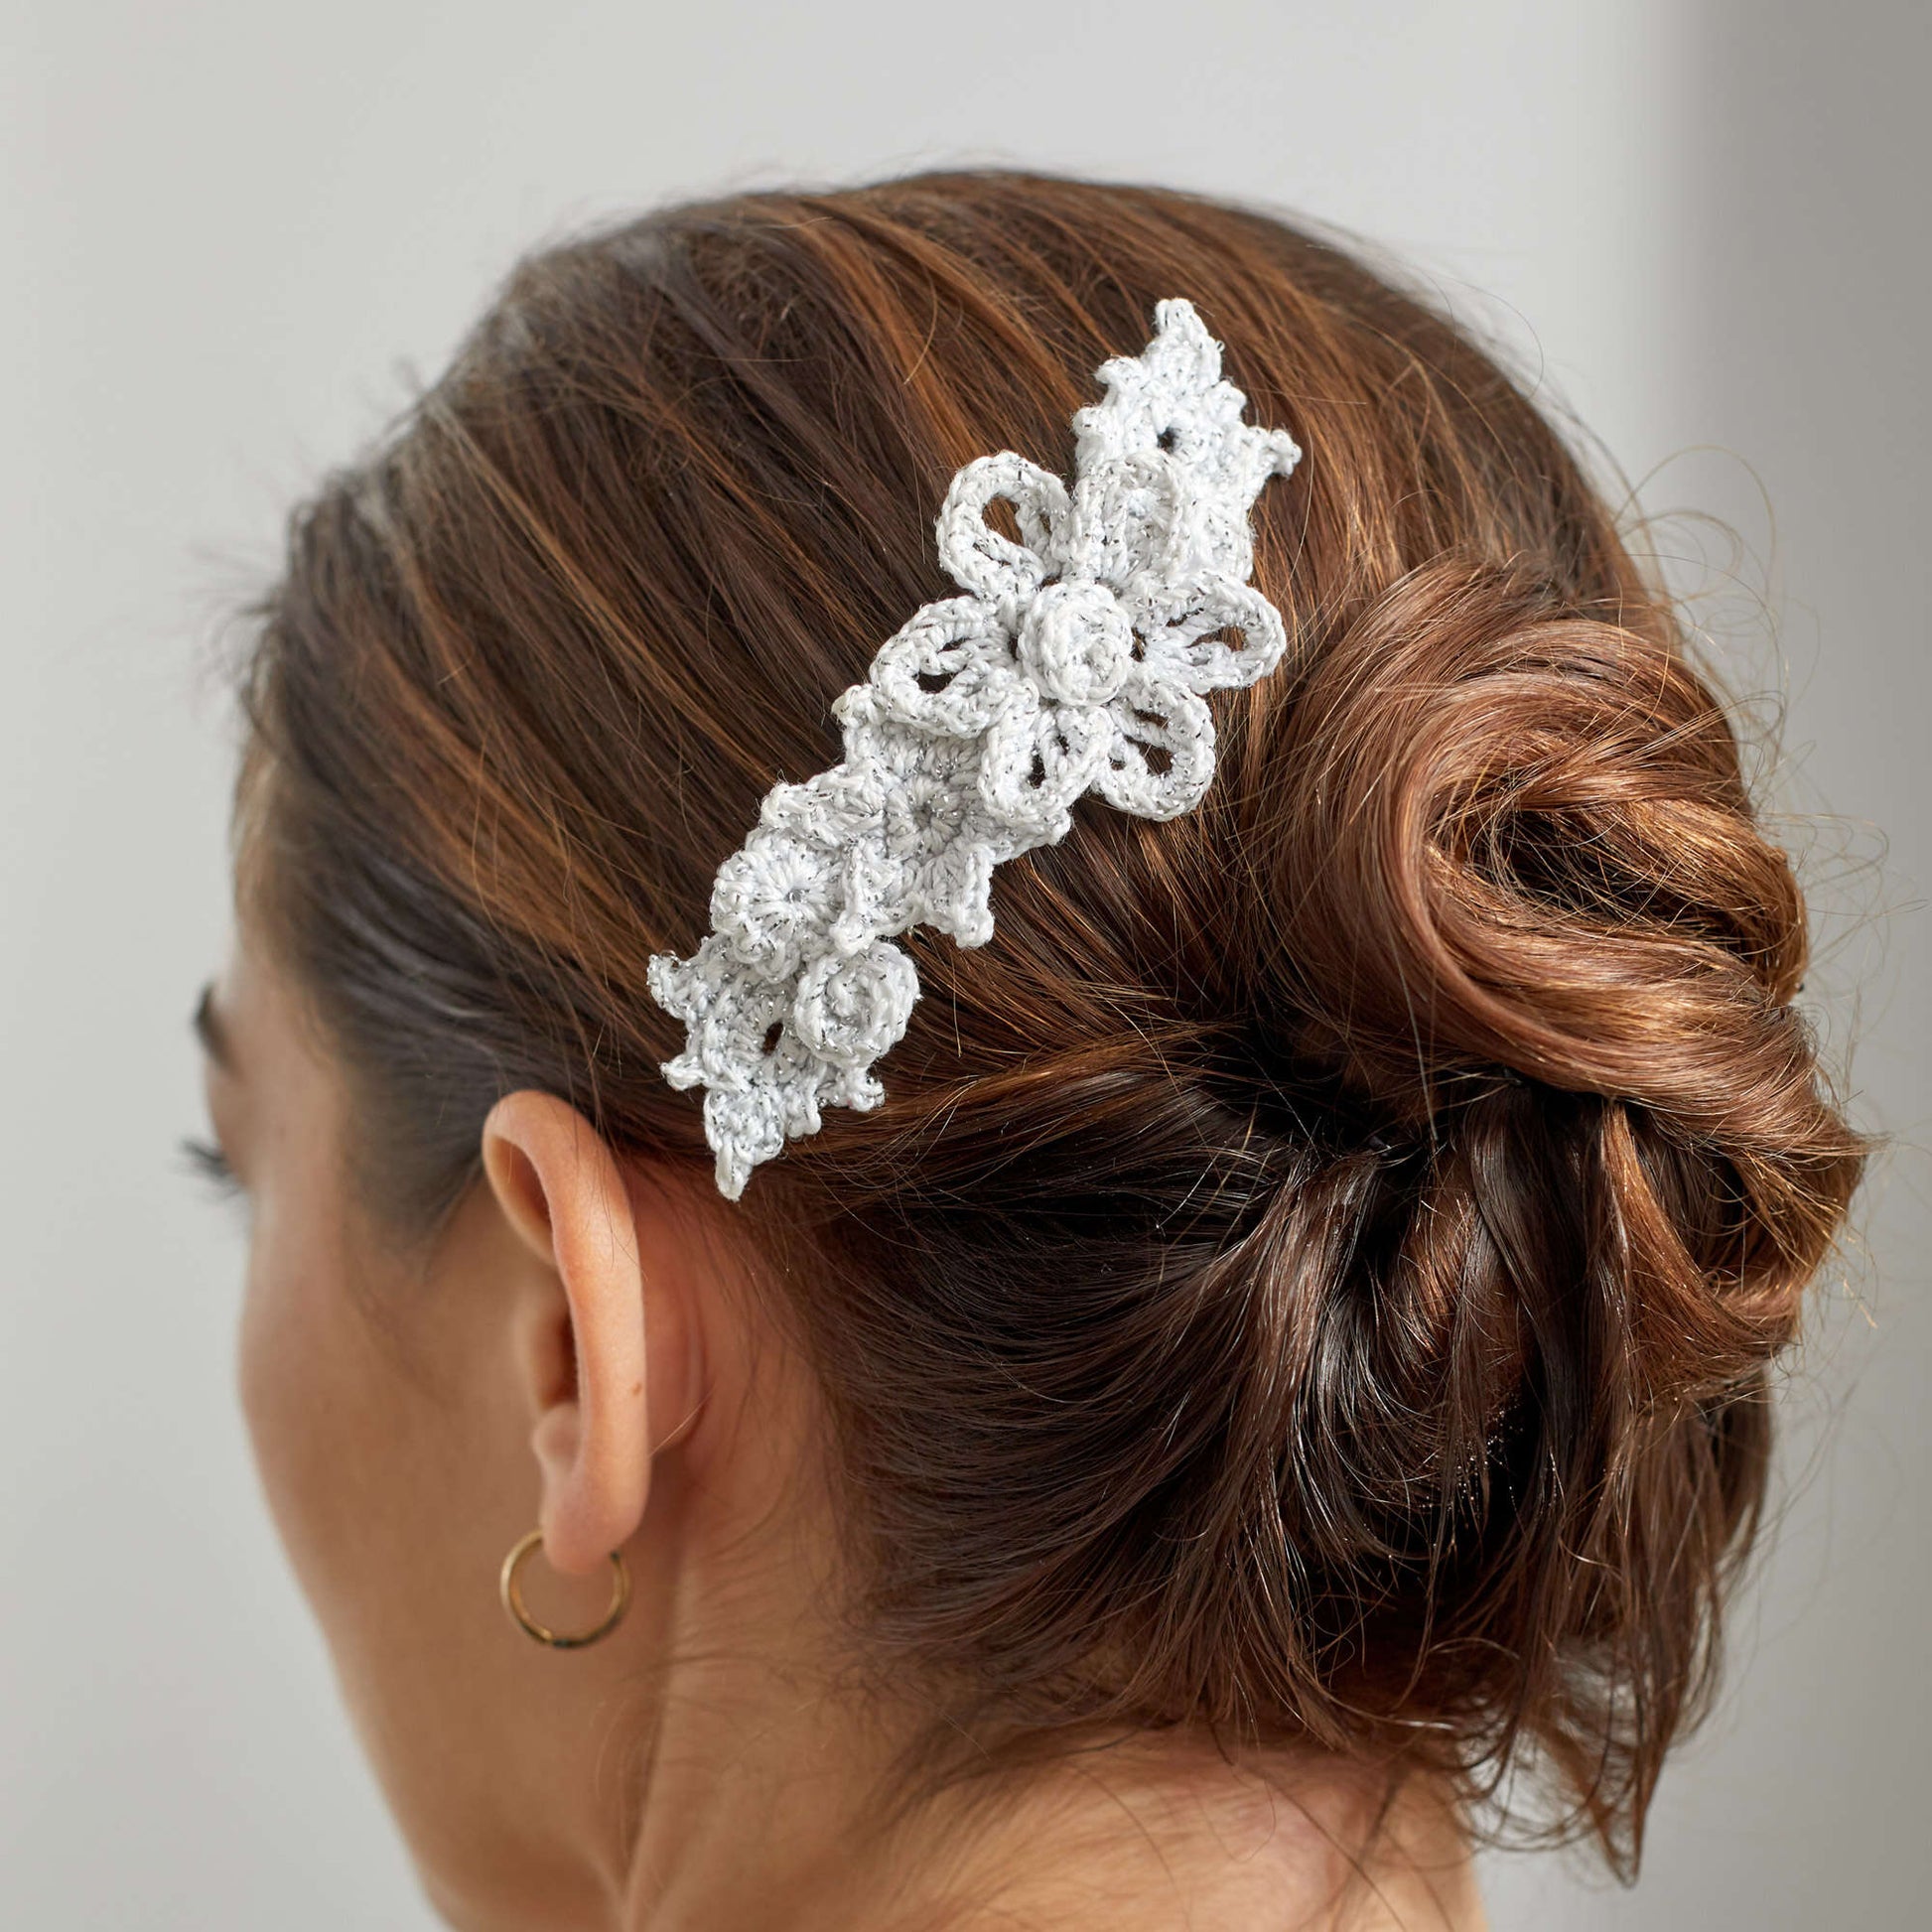 Free Aunt Lydia's Crochet Floral Hair Comb Pattern